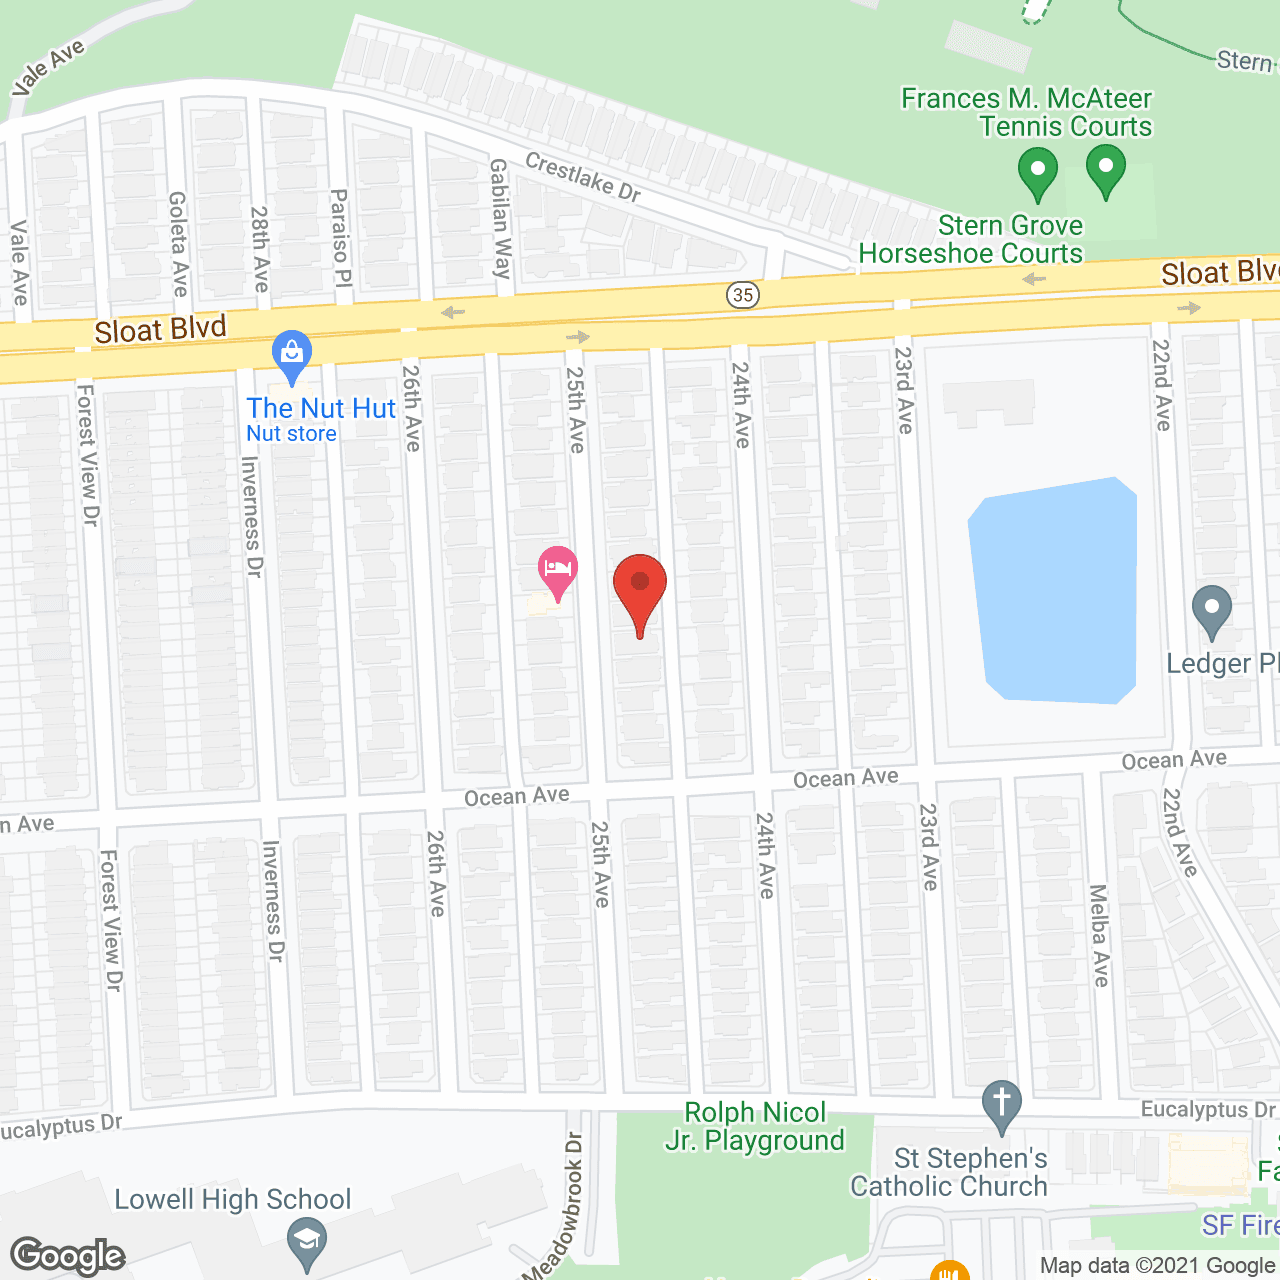 Janet's Residential Facility in google map